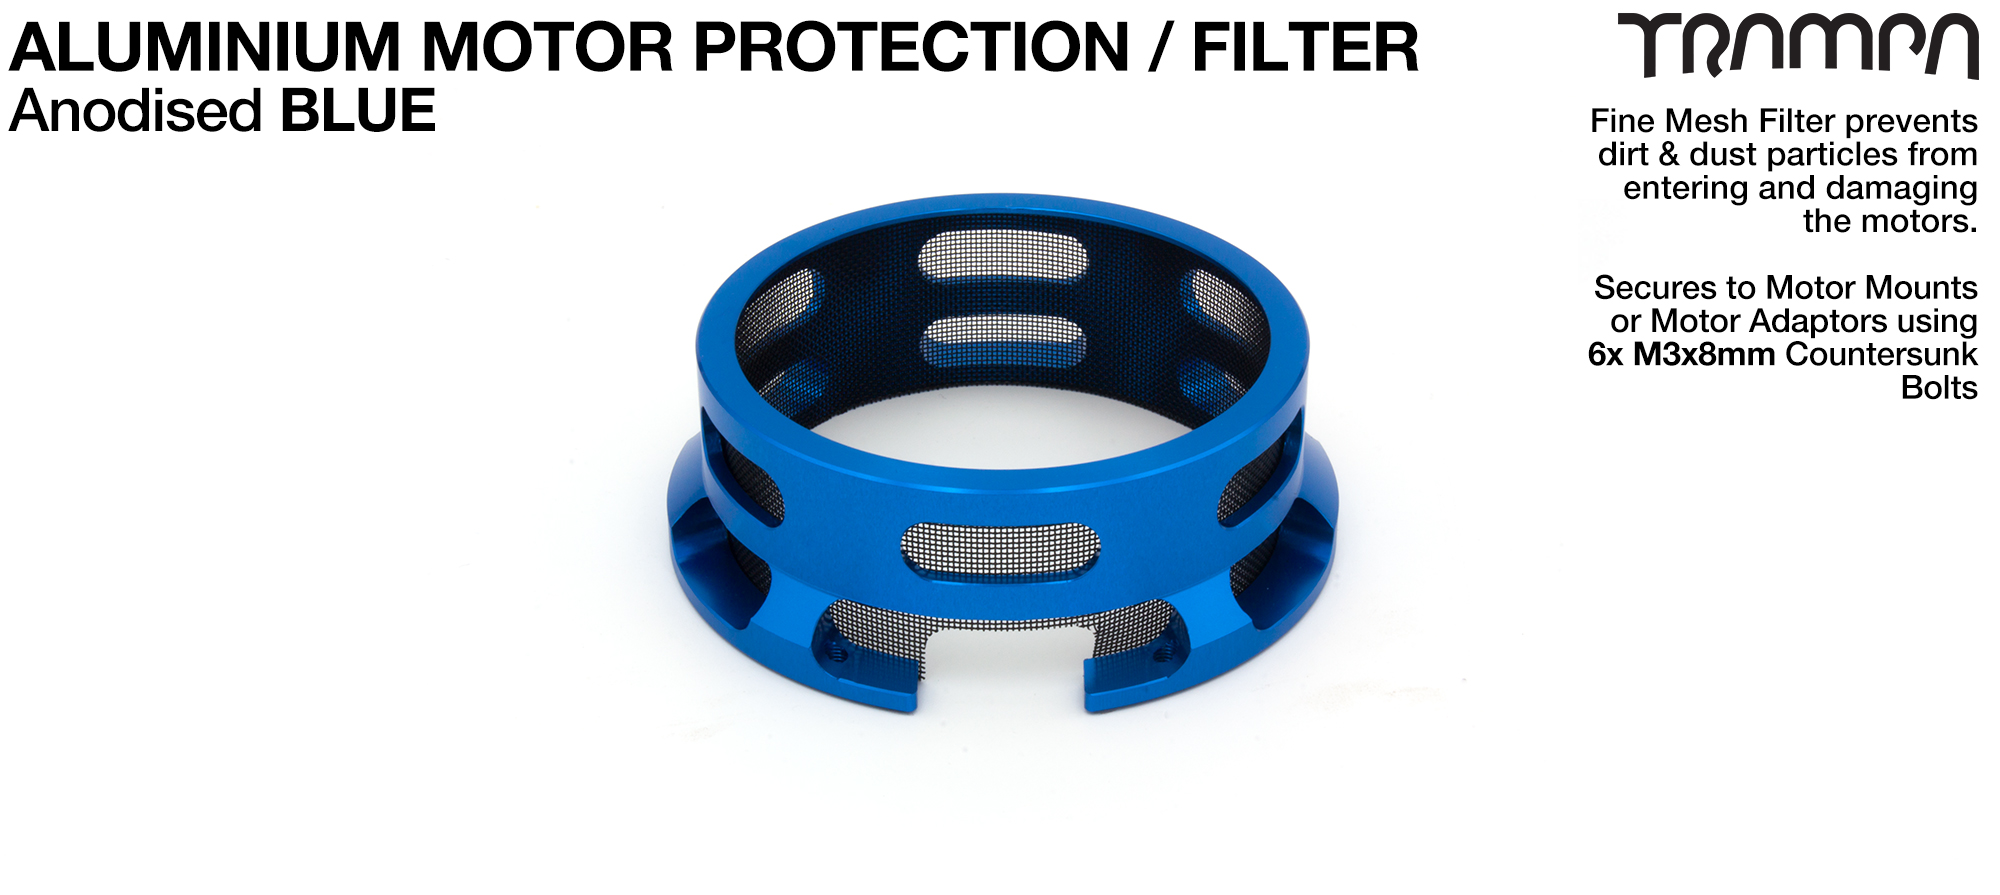 HALF CAGE Motor protection Housing - BLUE 